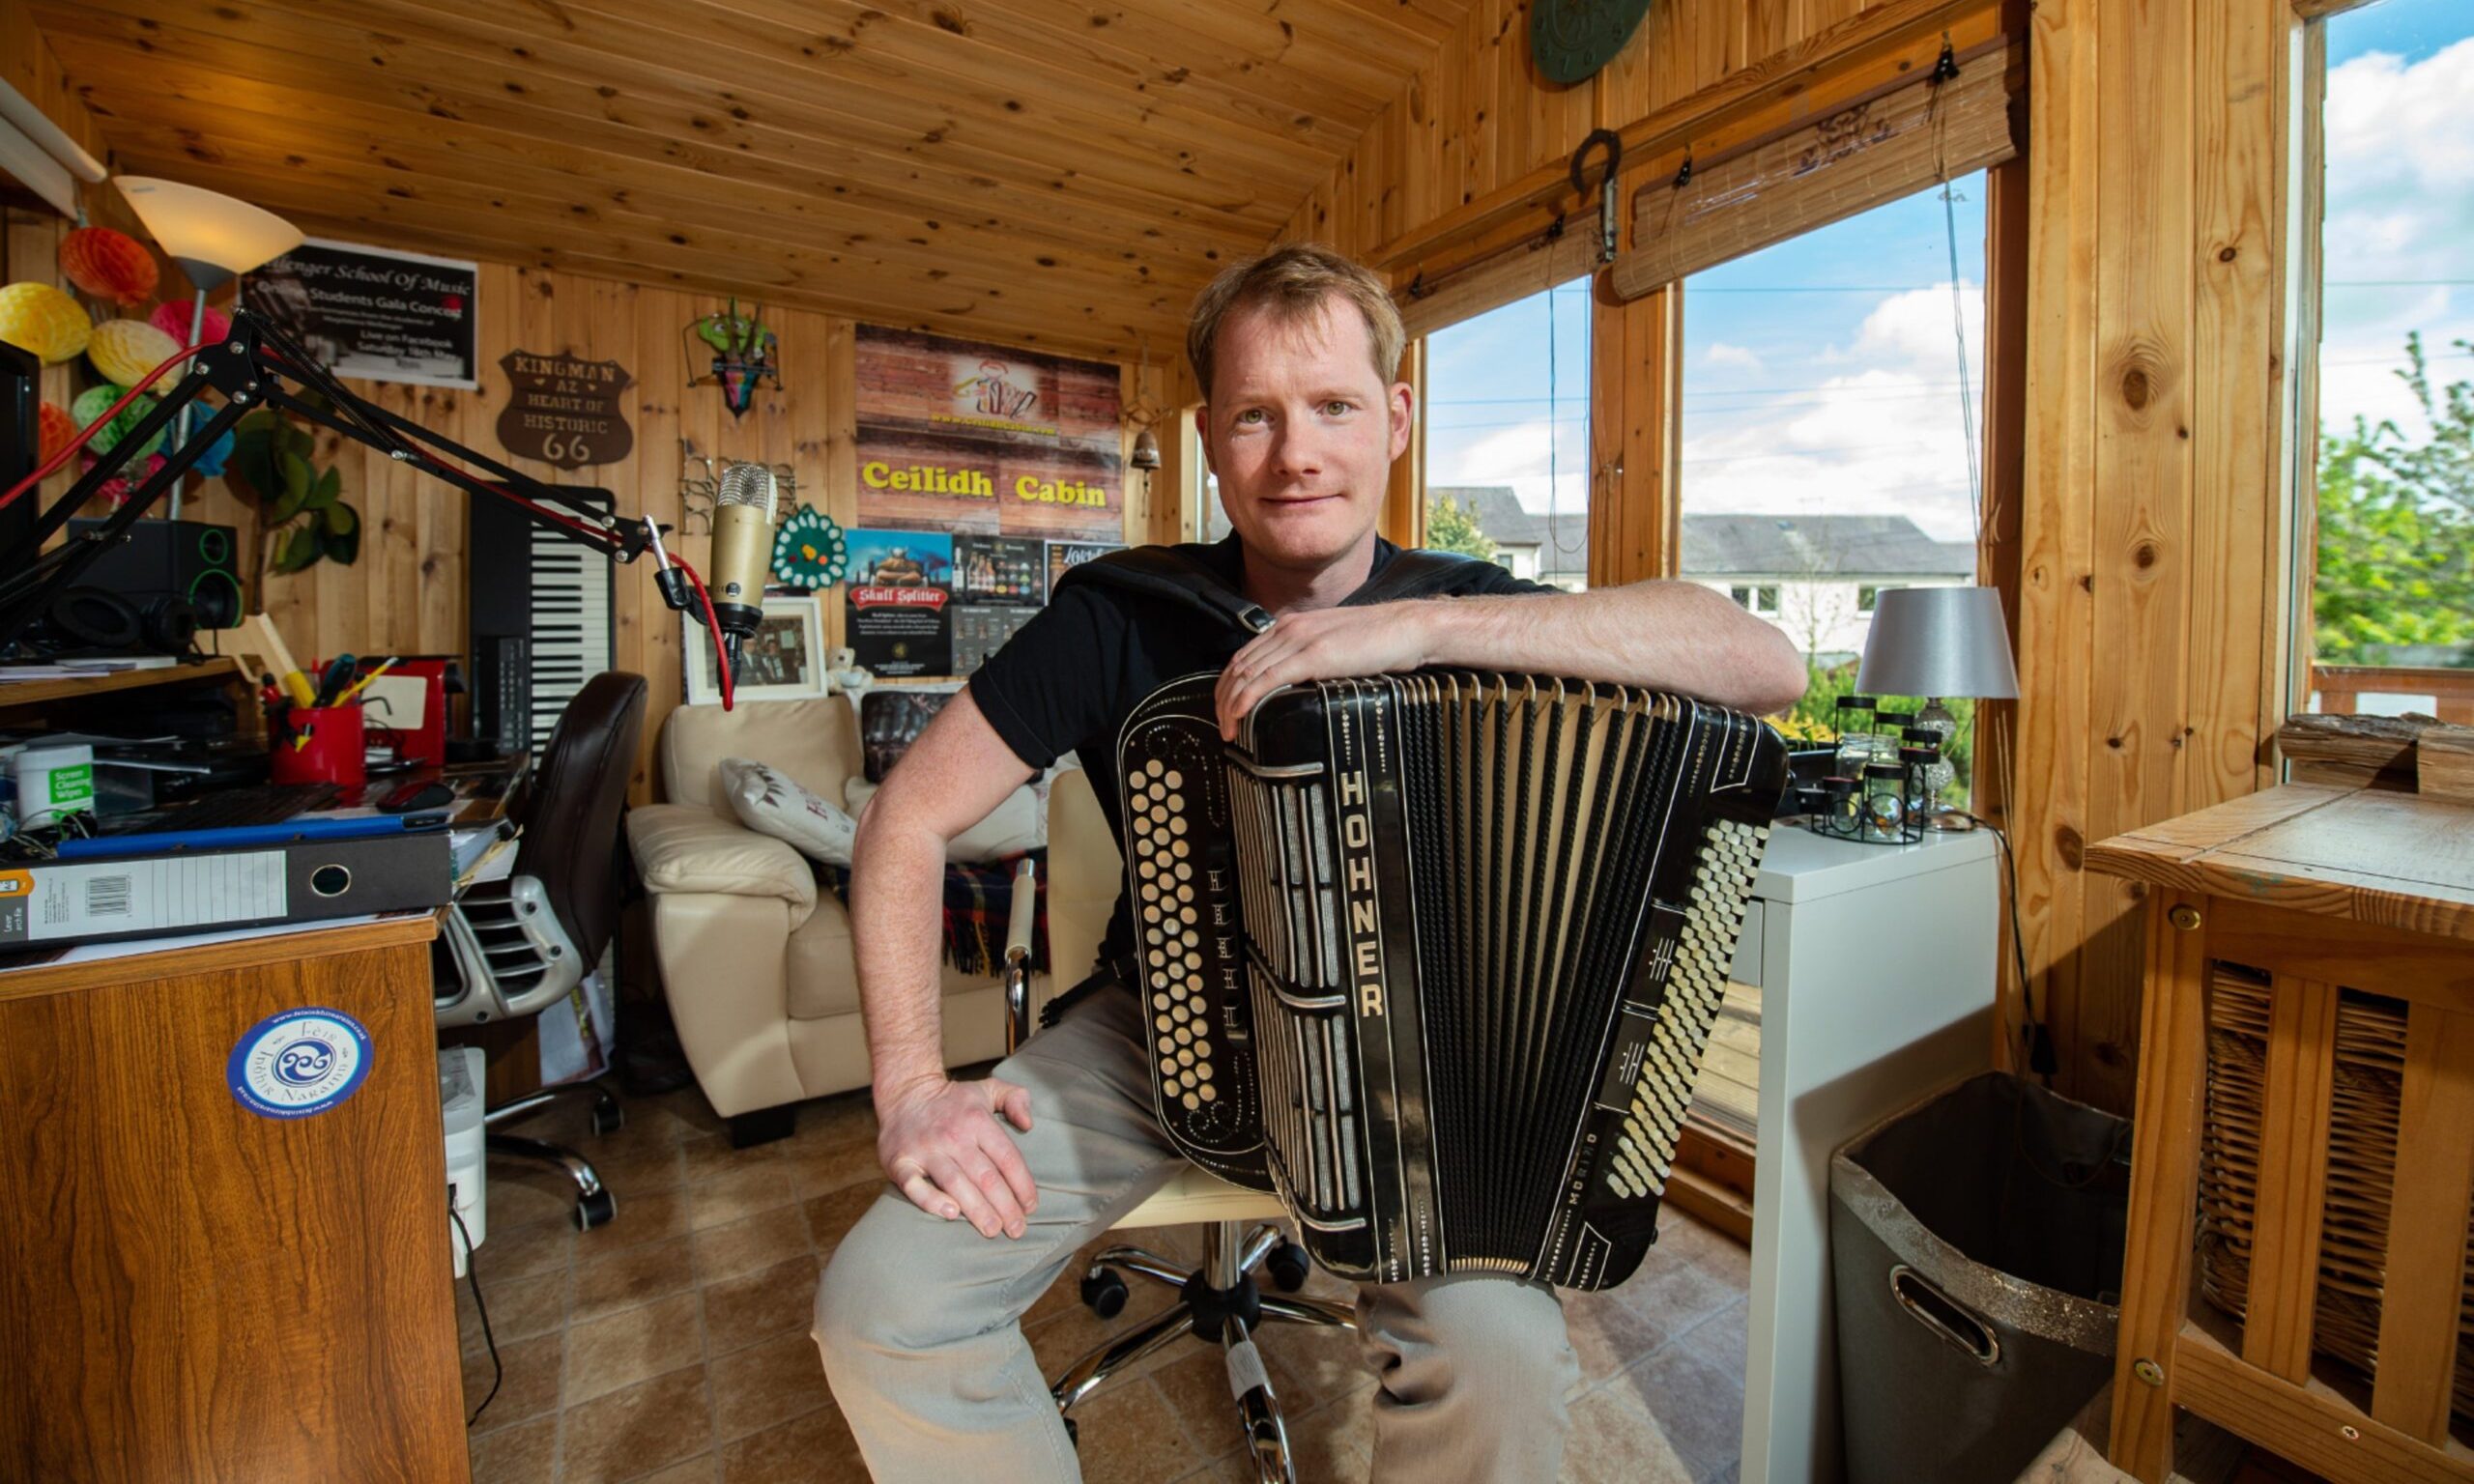 Graeme Mackay smiling while leaning on accordion.